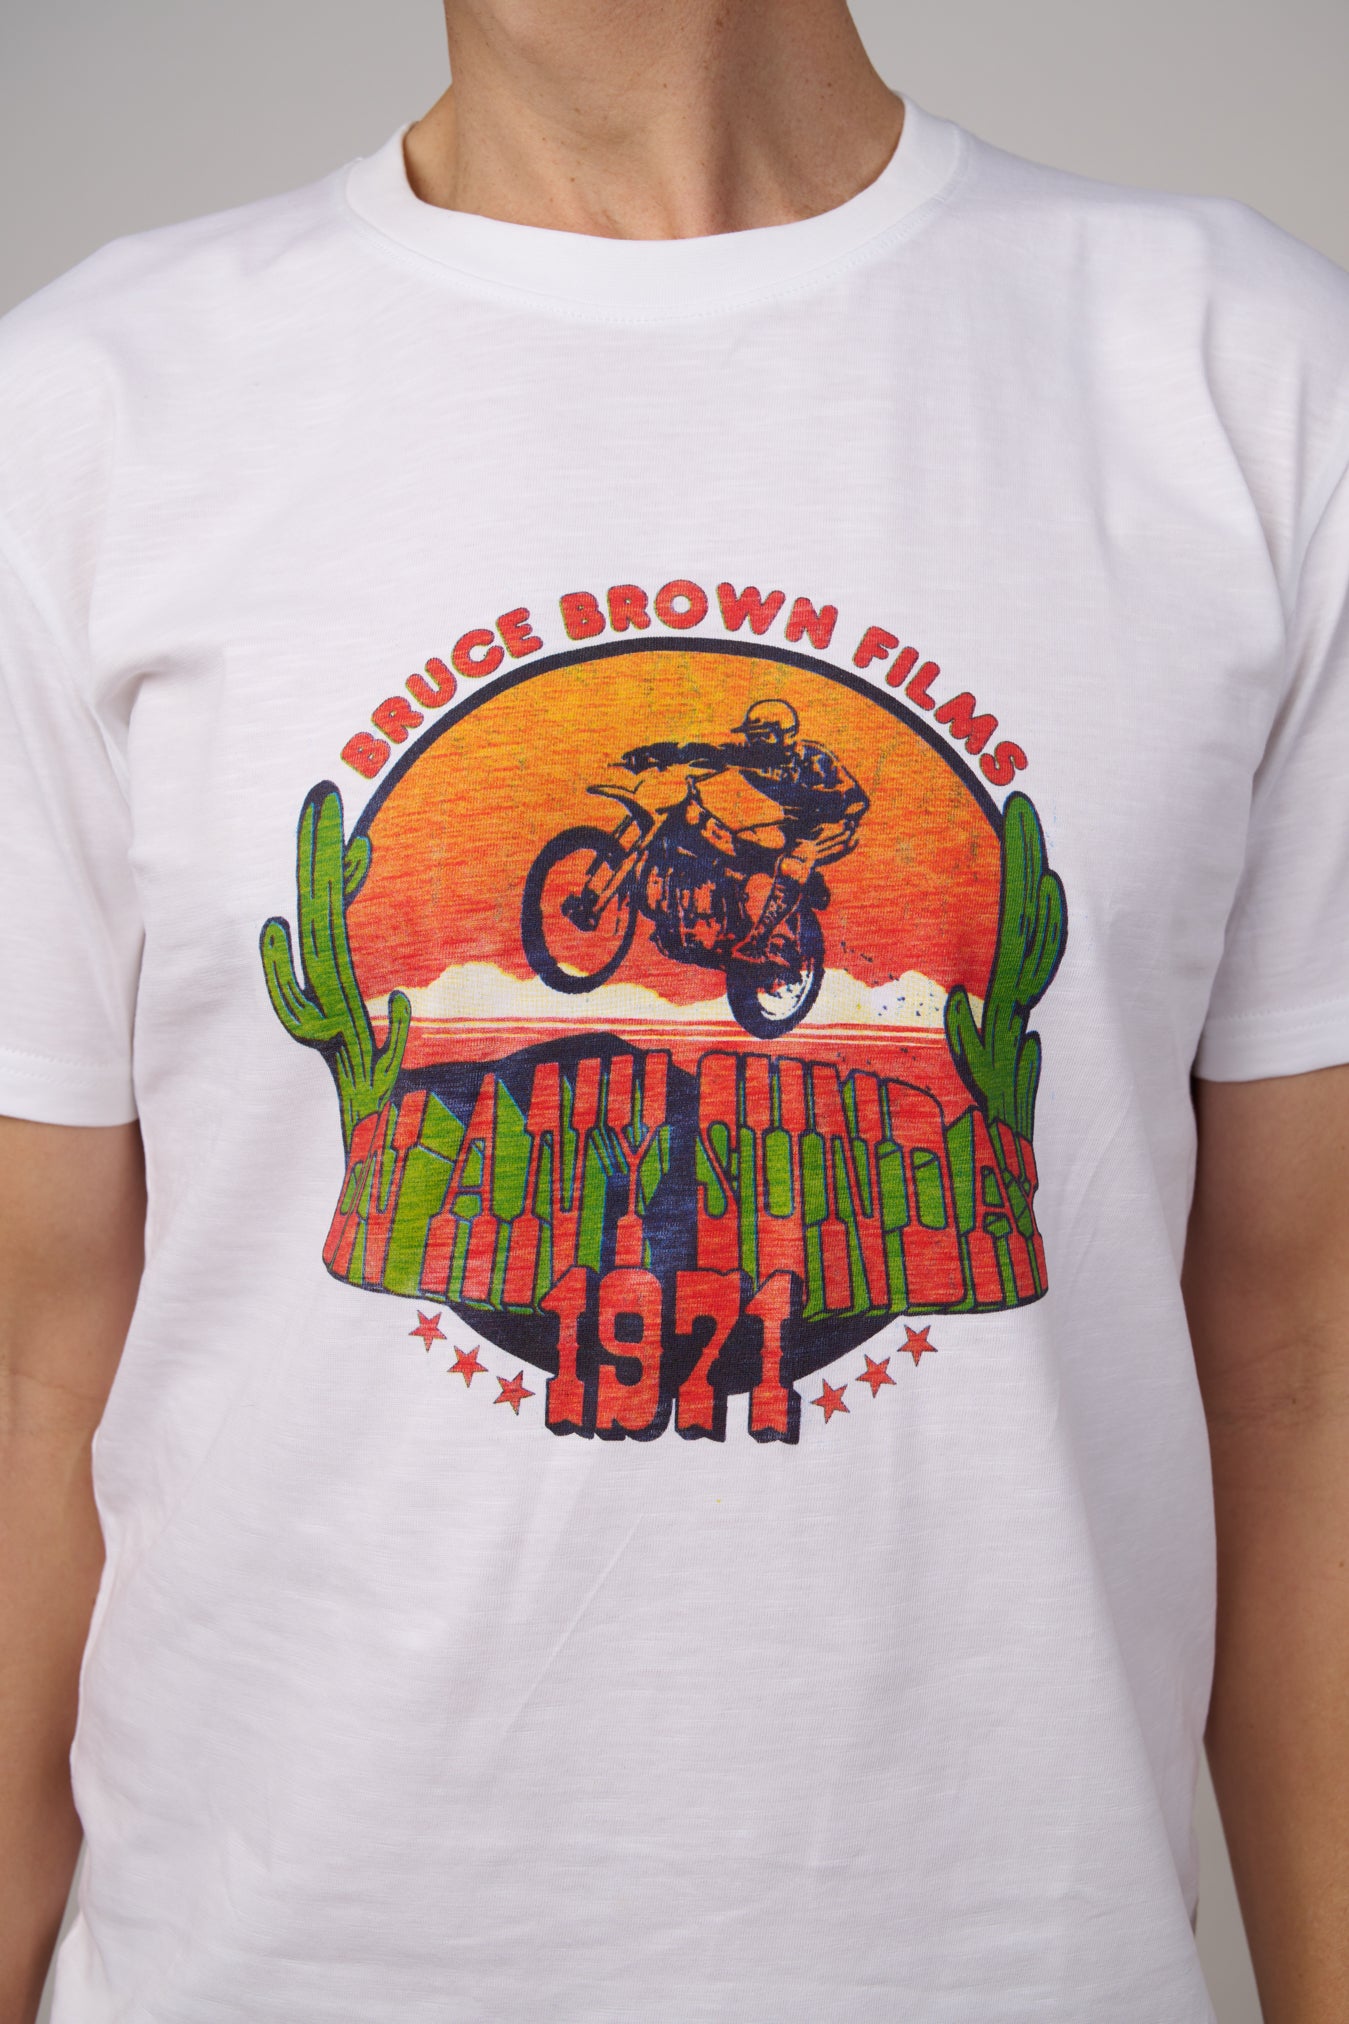 Bruce Brown Steve McQueen On Any Sunday Tee